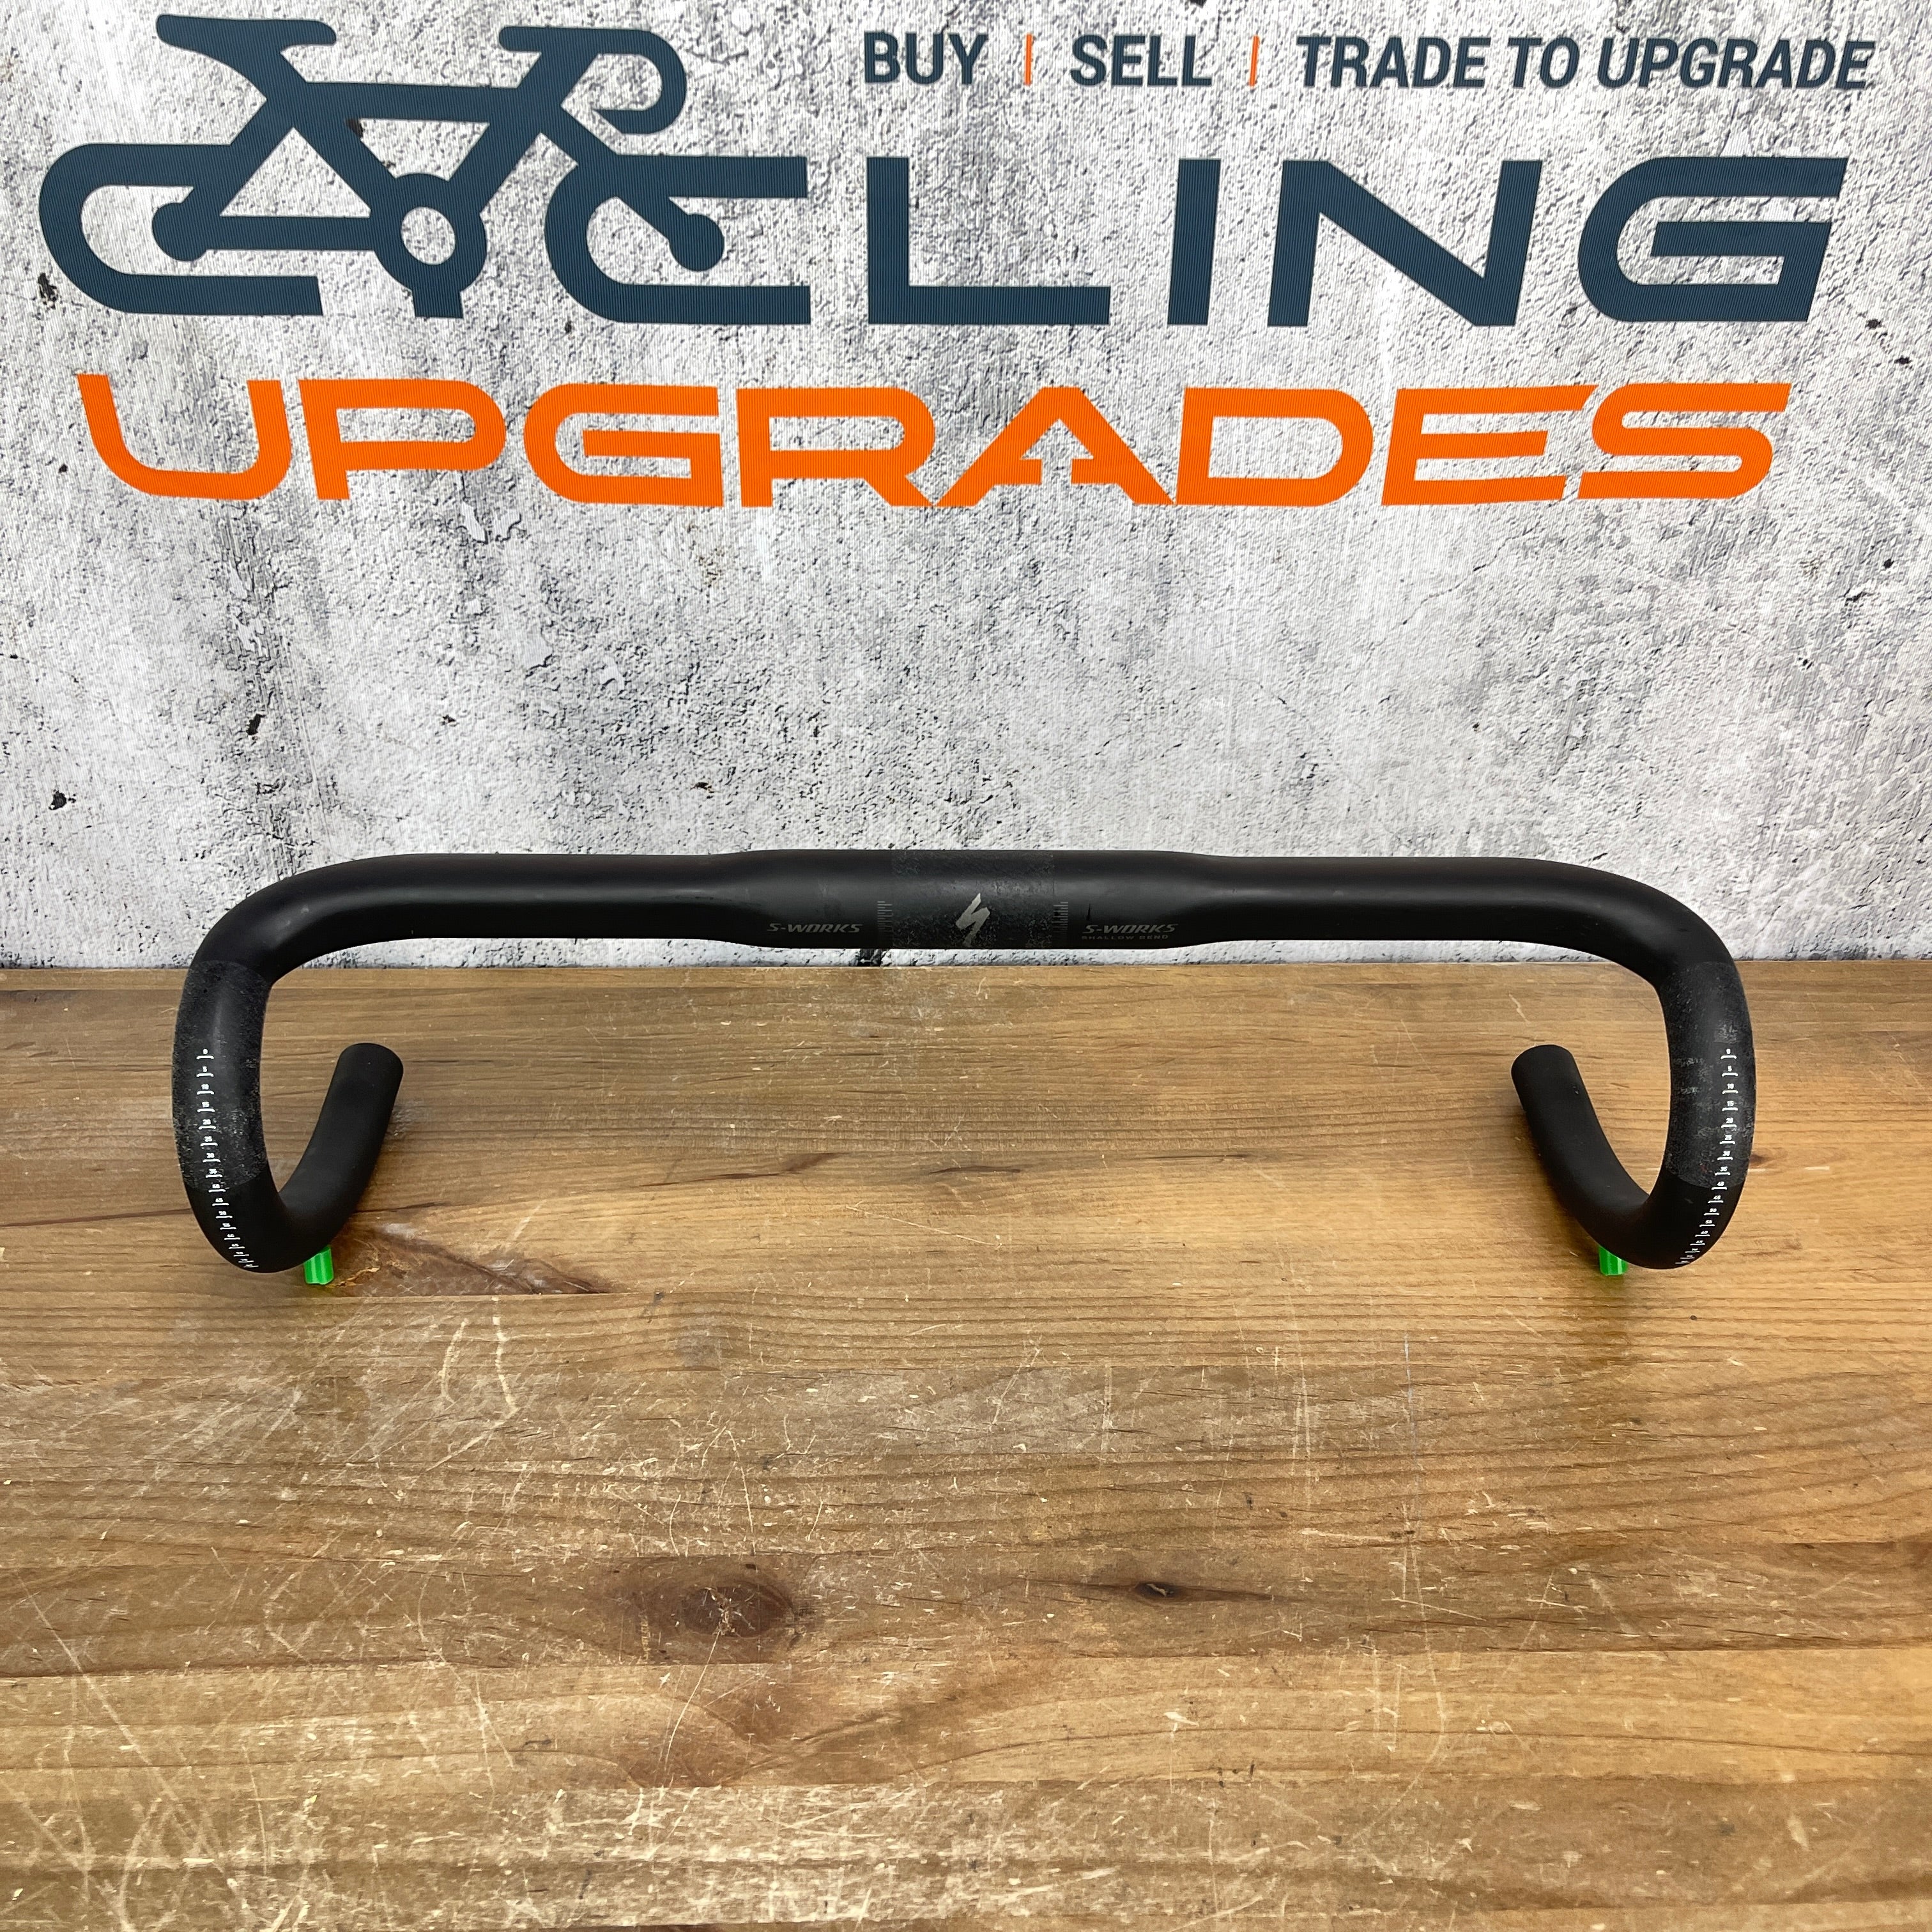 S-WORKS CARBON SHALLOW ROAD BAR 380